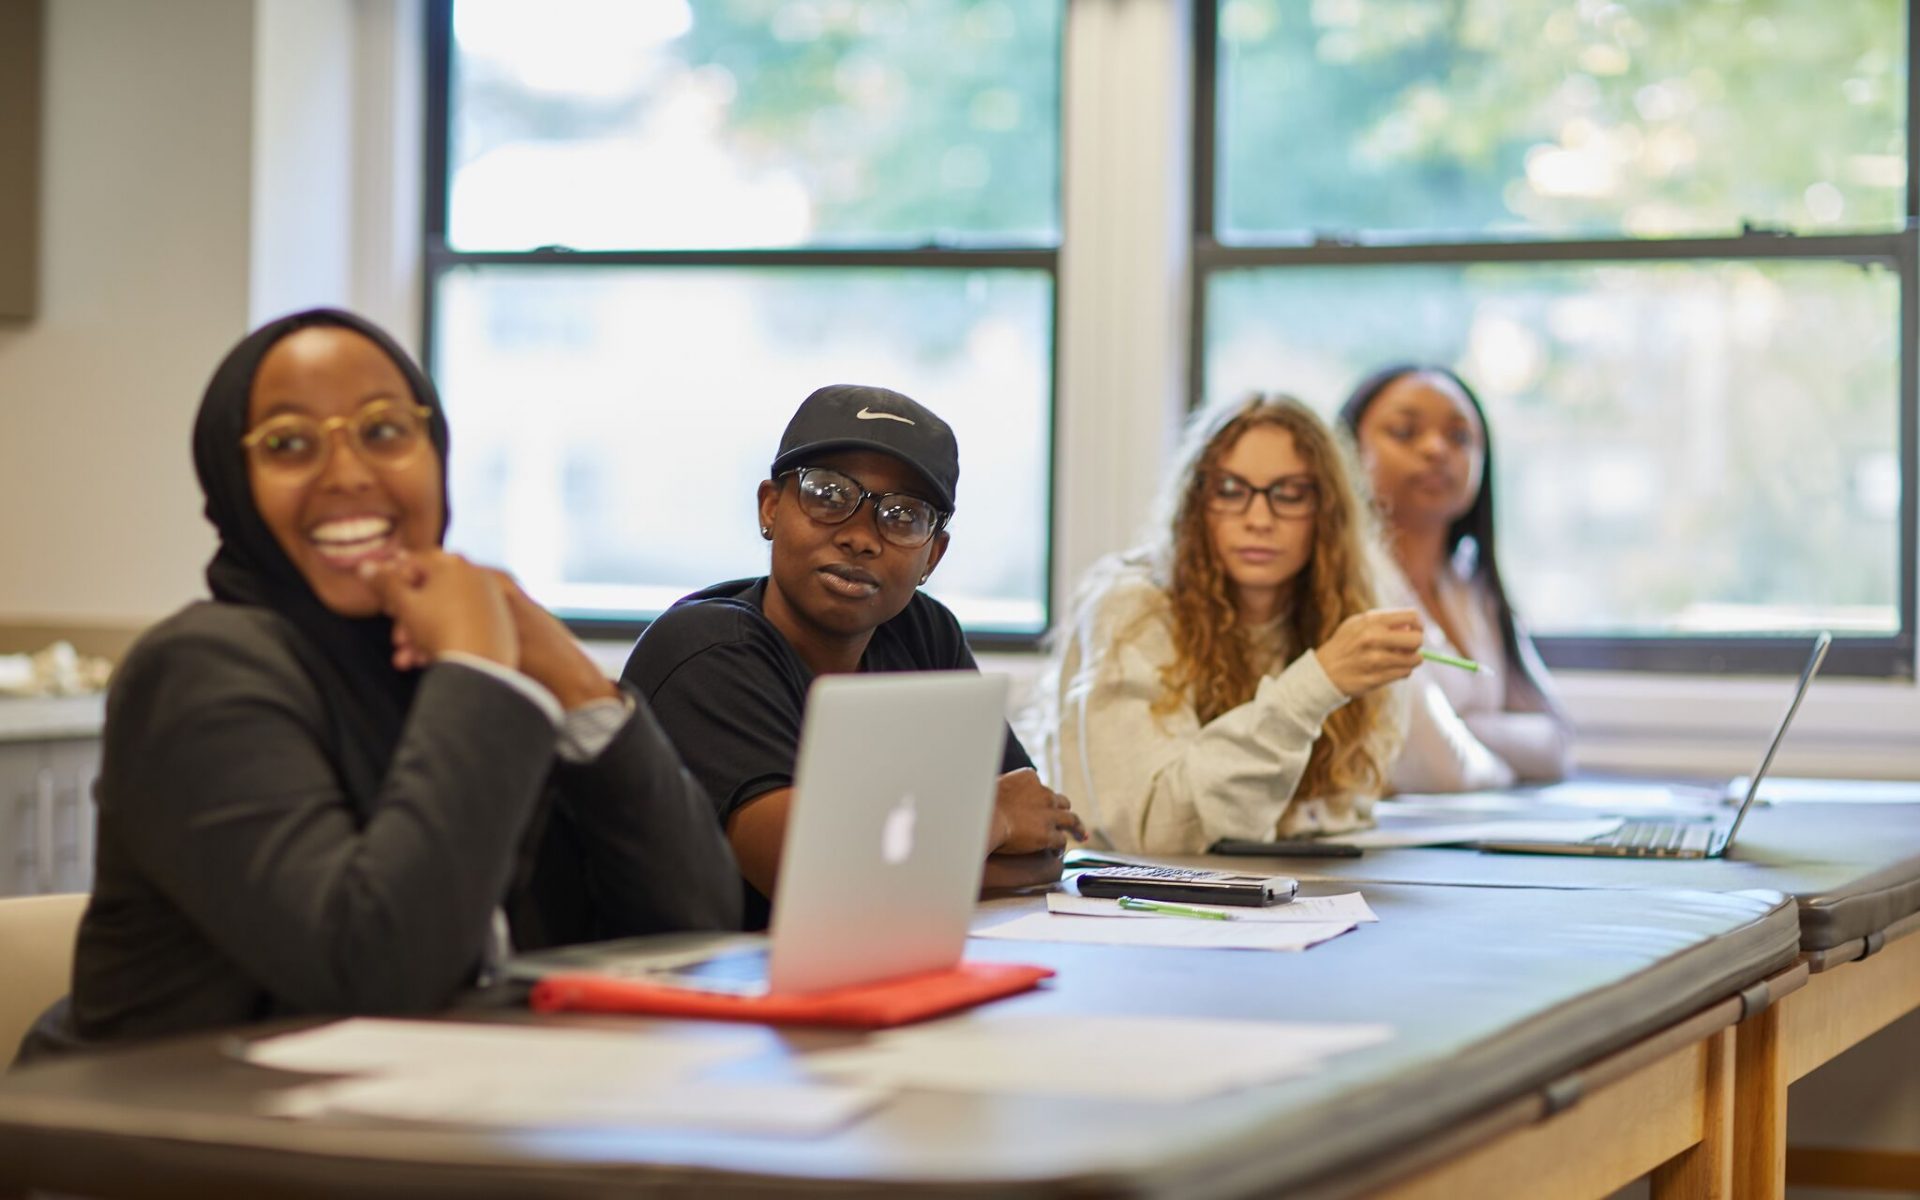 White, Black, and Brown Otterbein Students sit together in a classroom.